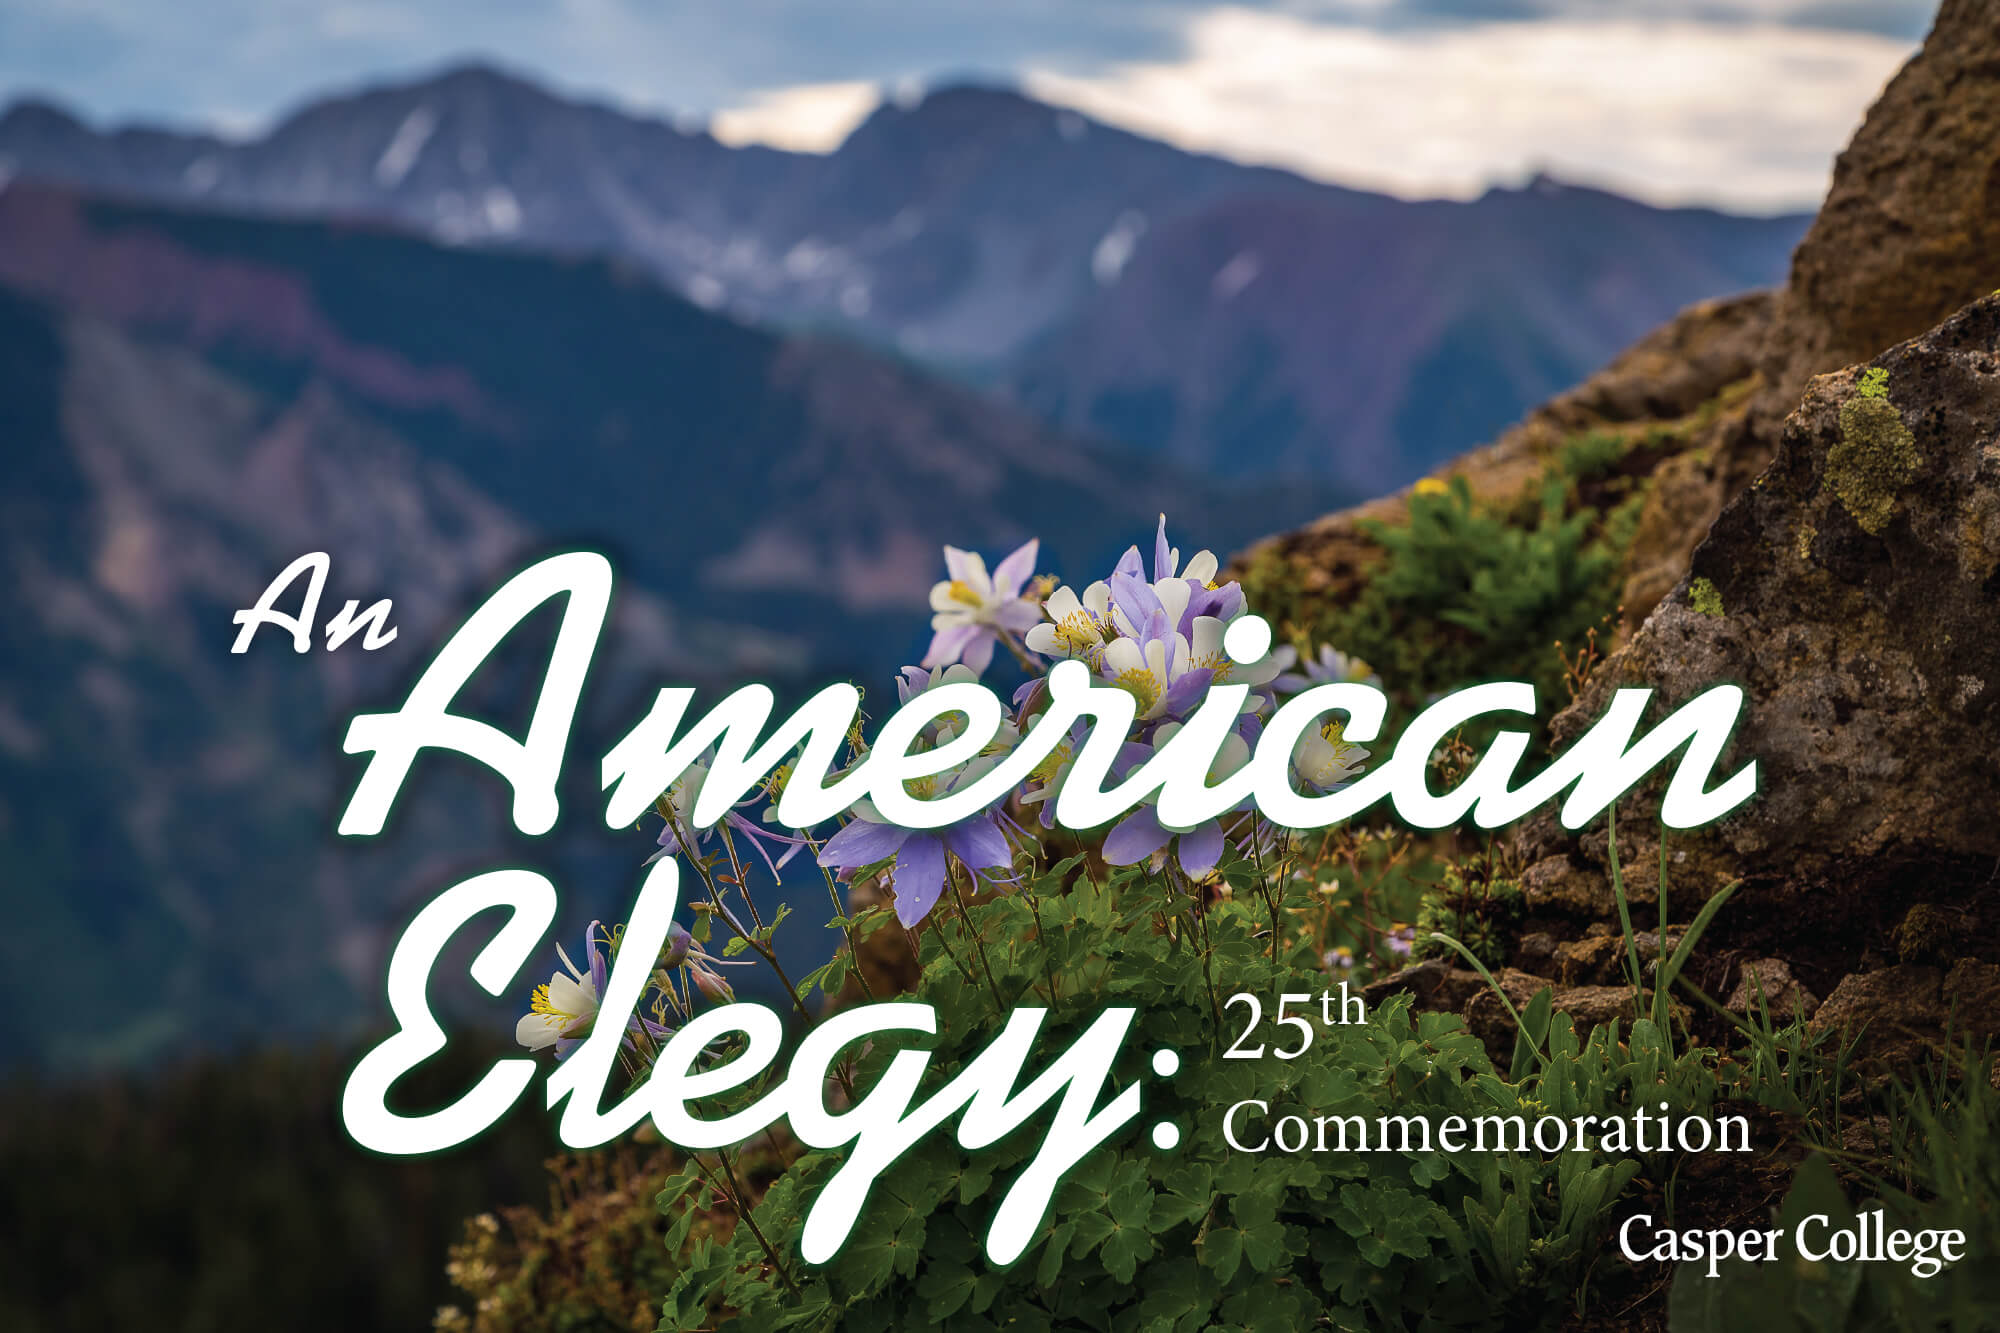 Image for "An American Elegy 25th Commemoration" press release.